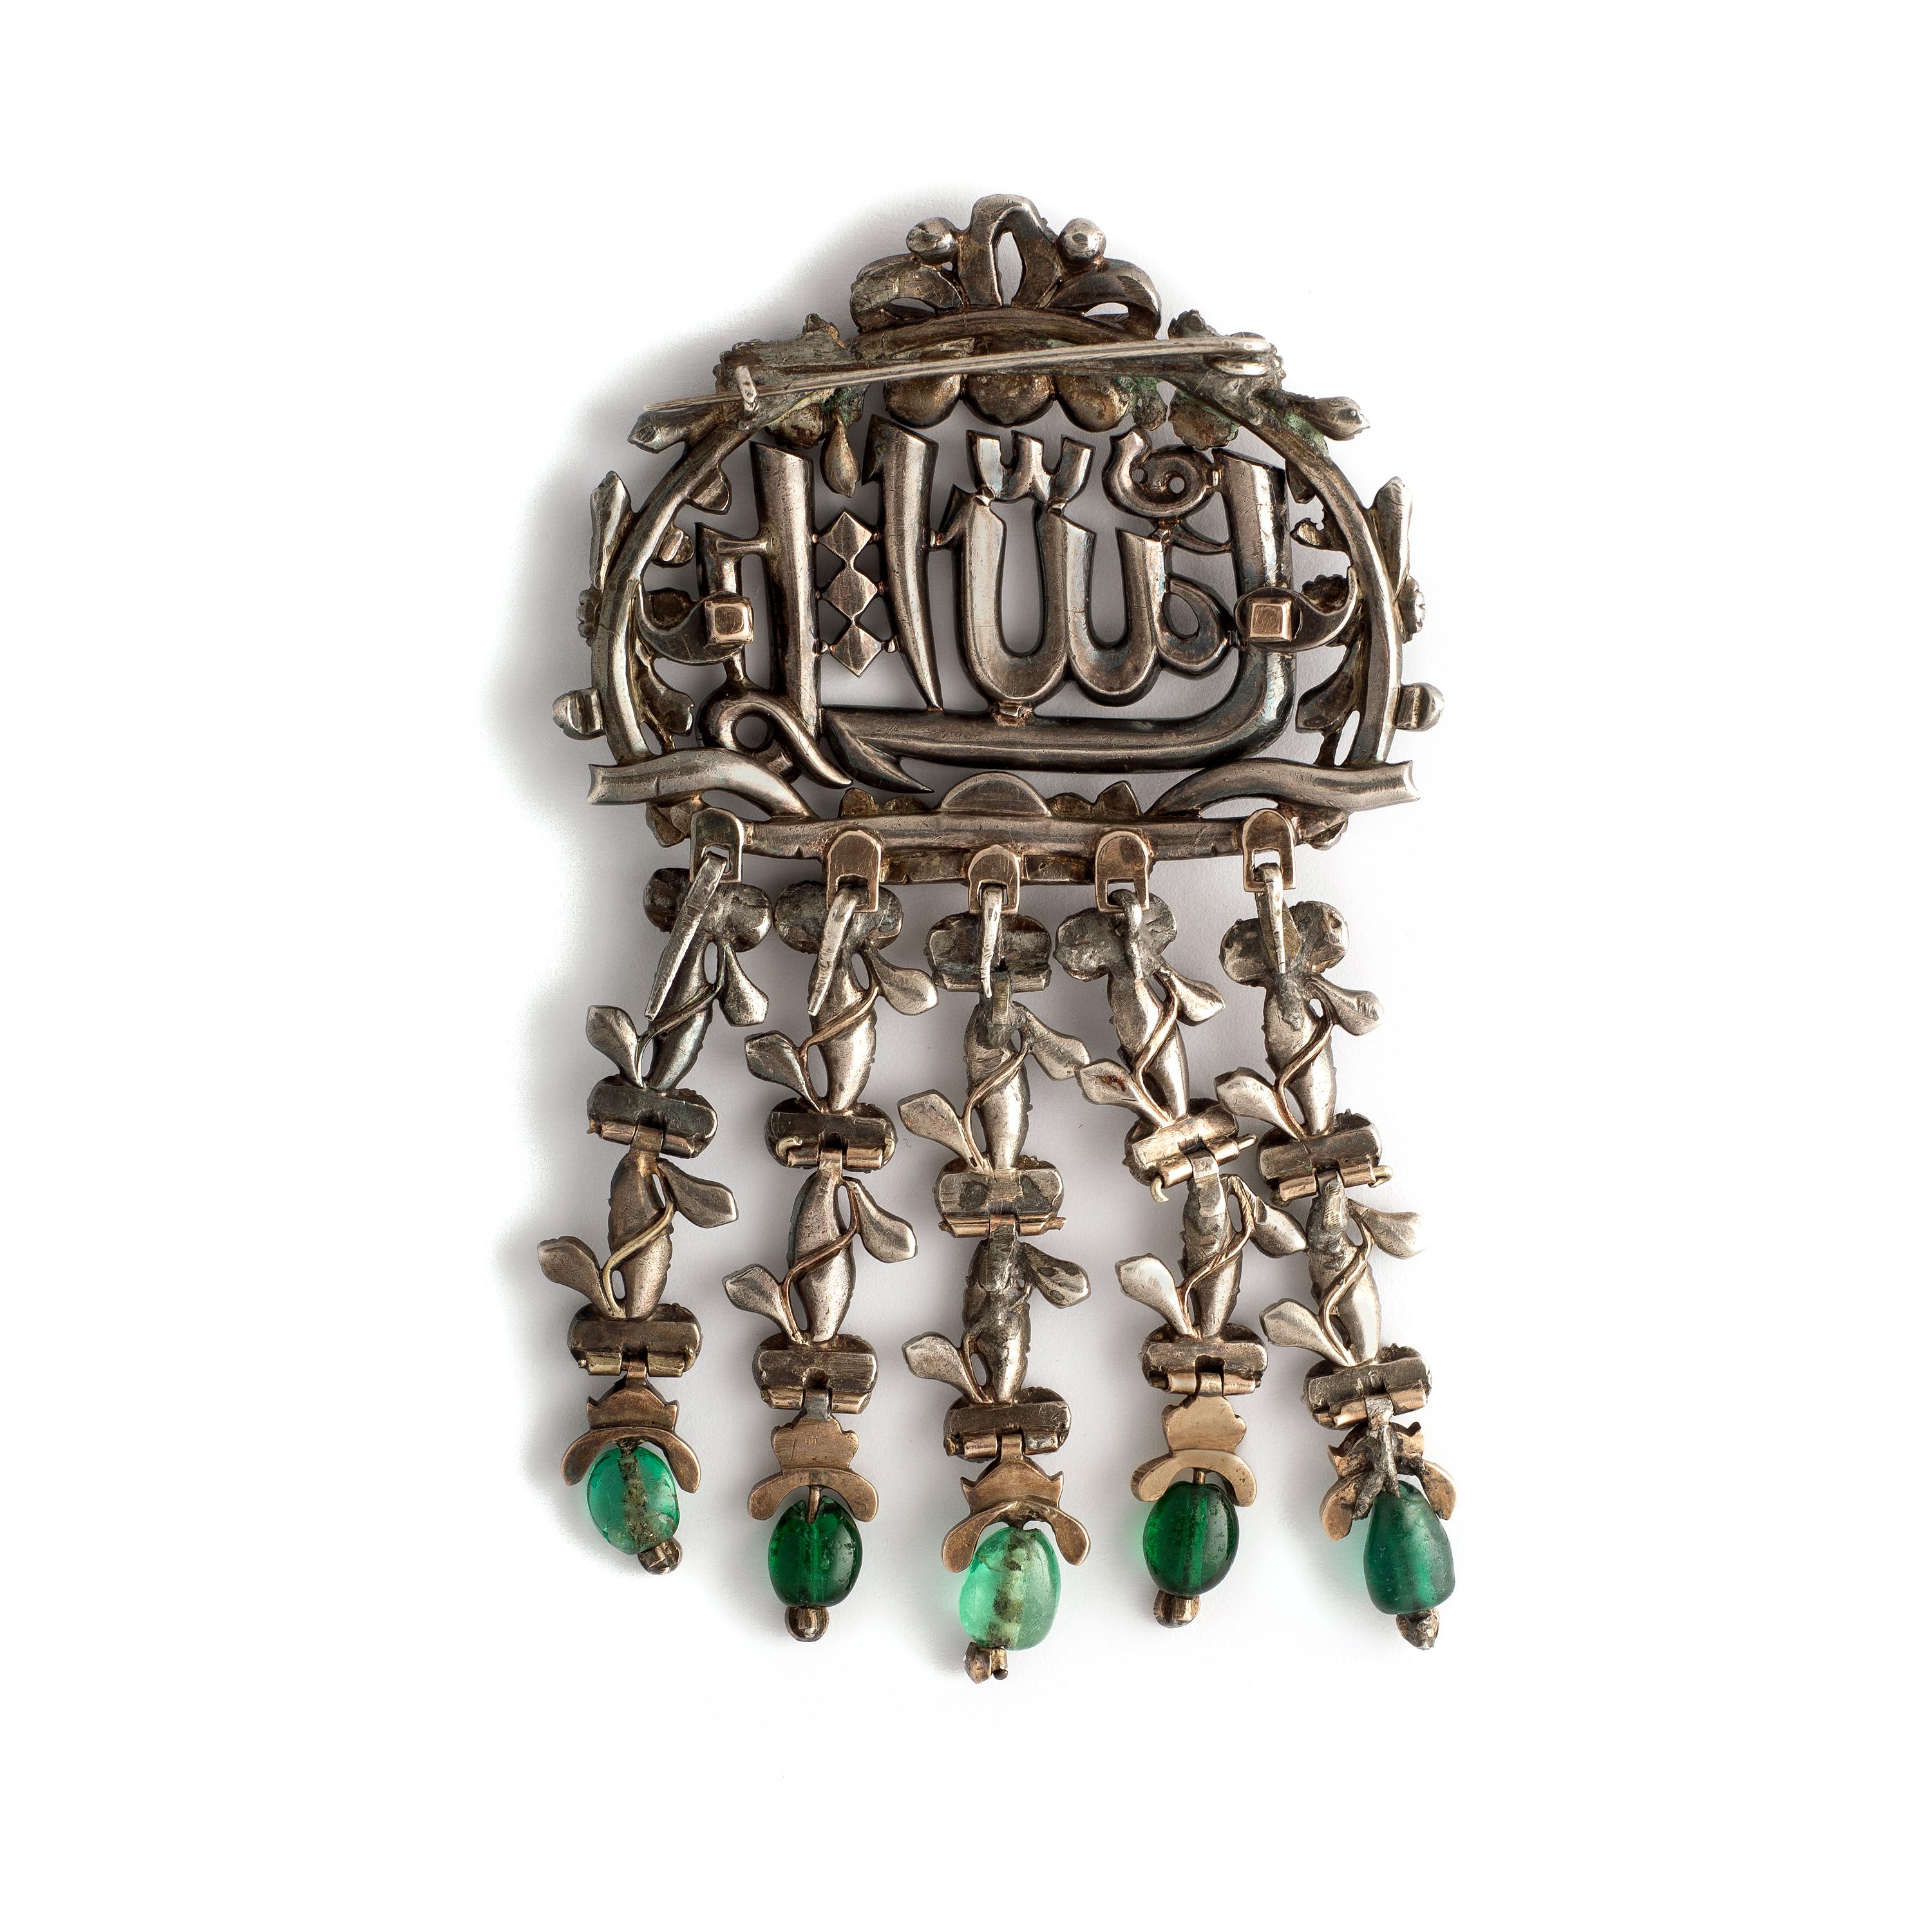 Impressive Stomacher Brooch set by Rose cut Diamond on silver and gold.
Five Emerald Beads pending.

Arabic inscription for 